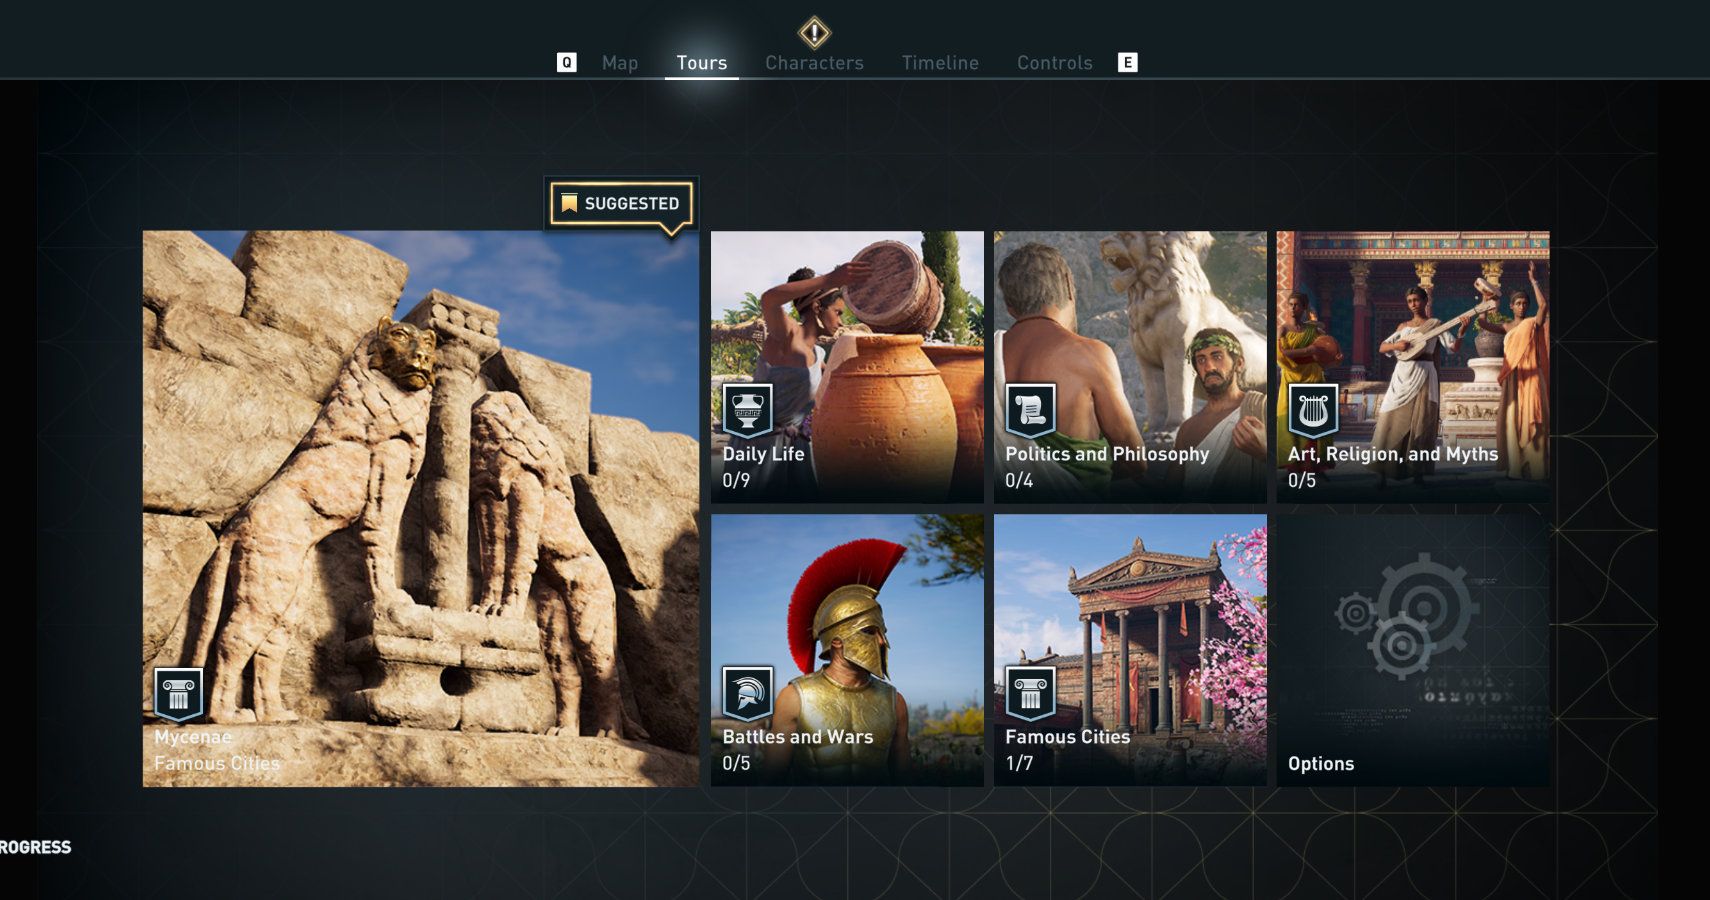 discovery tour menu in assassins creed odyssey